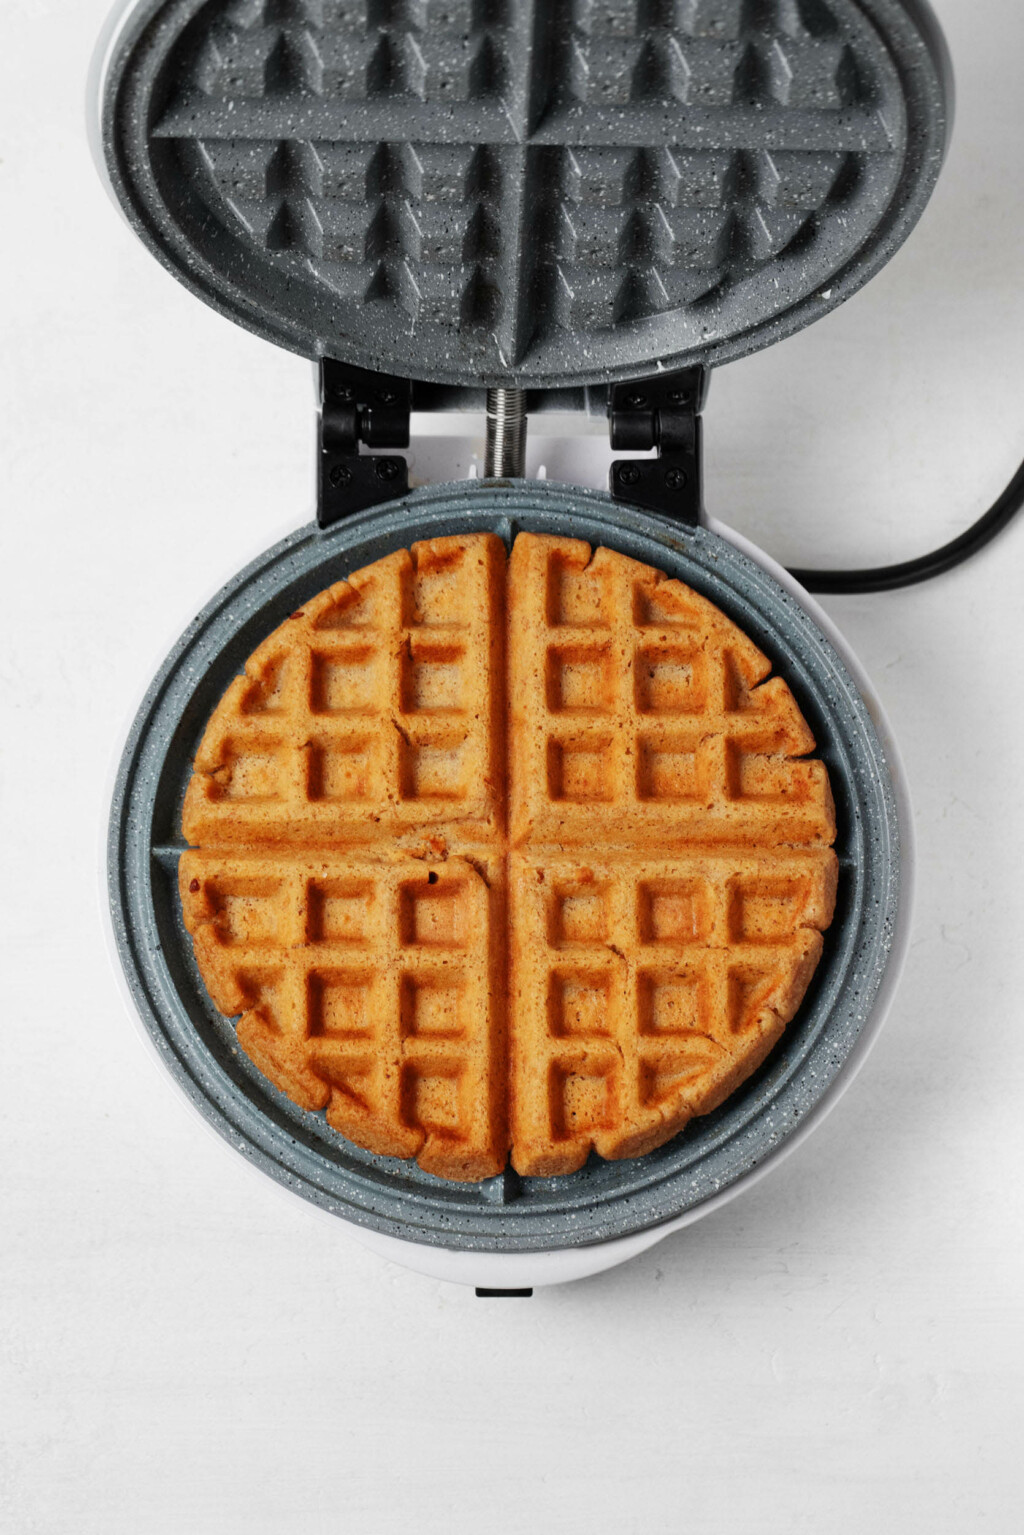 An overhead image of a Belgian waffle maker, which is being used to make a light and crispy vegan peanut butter waffle.